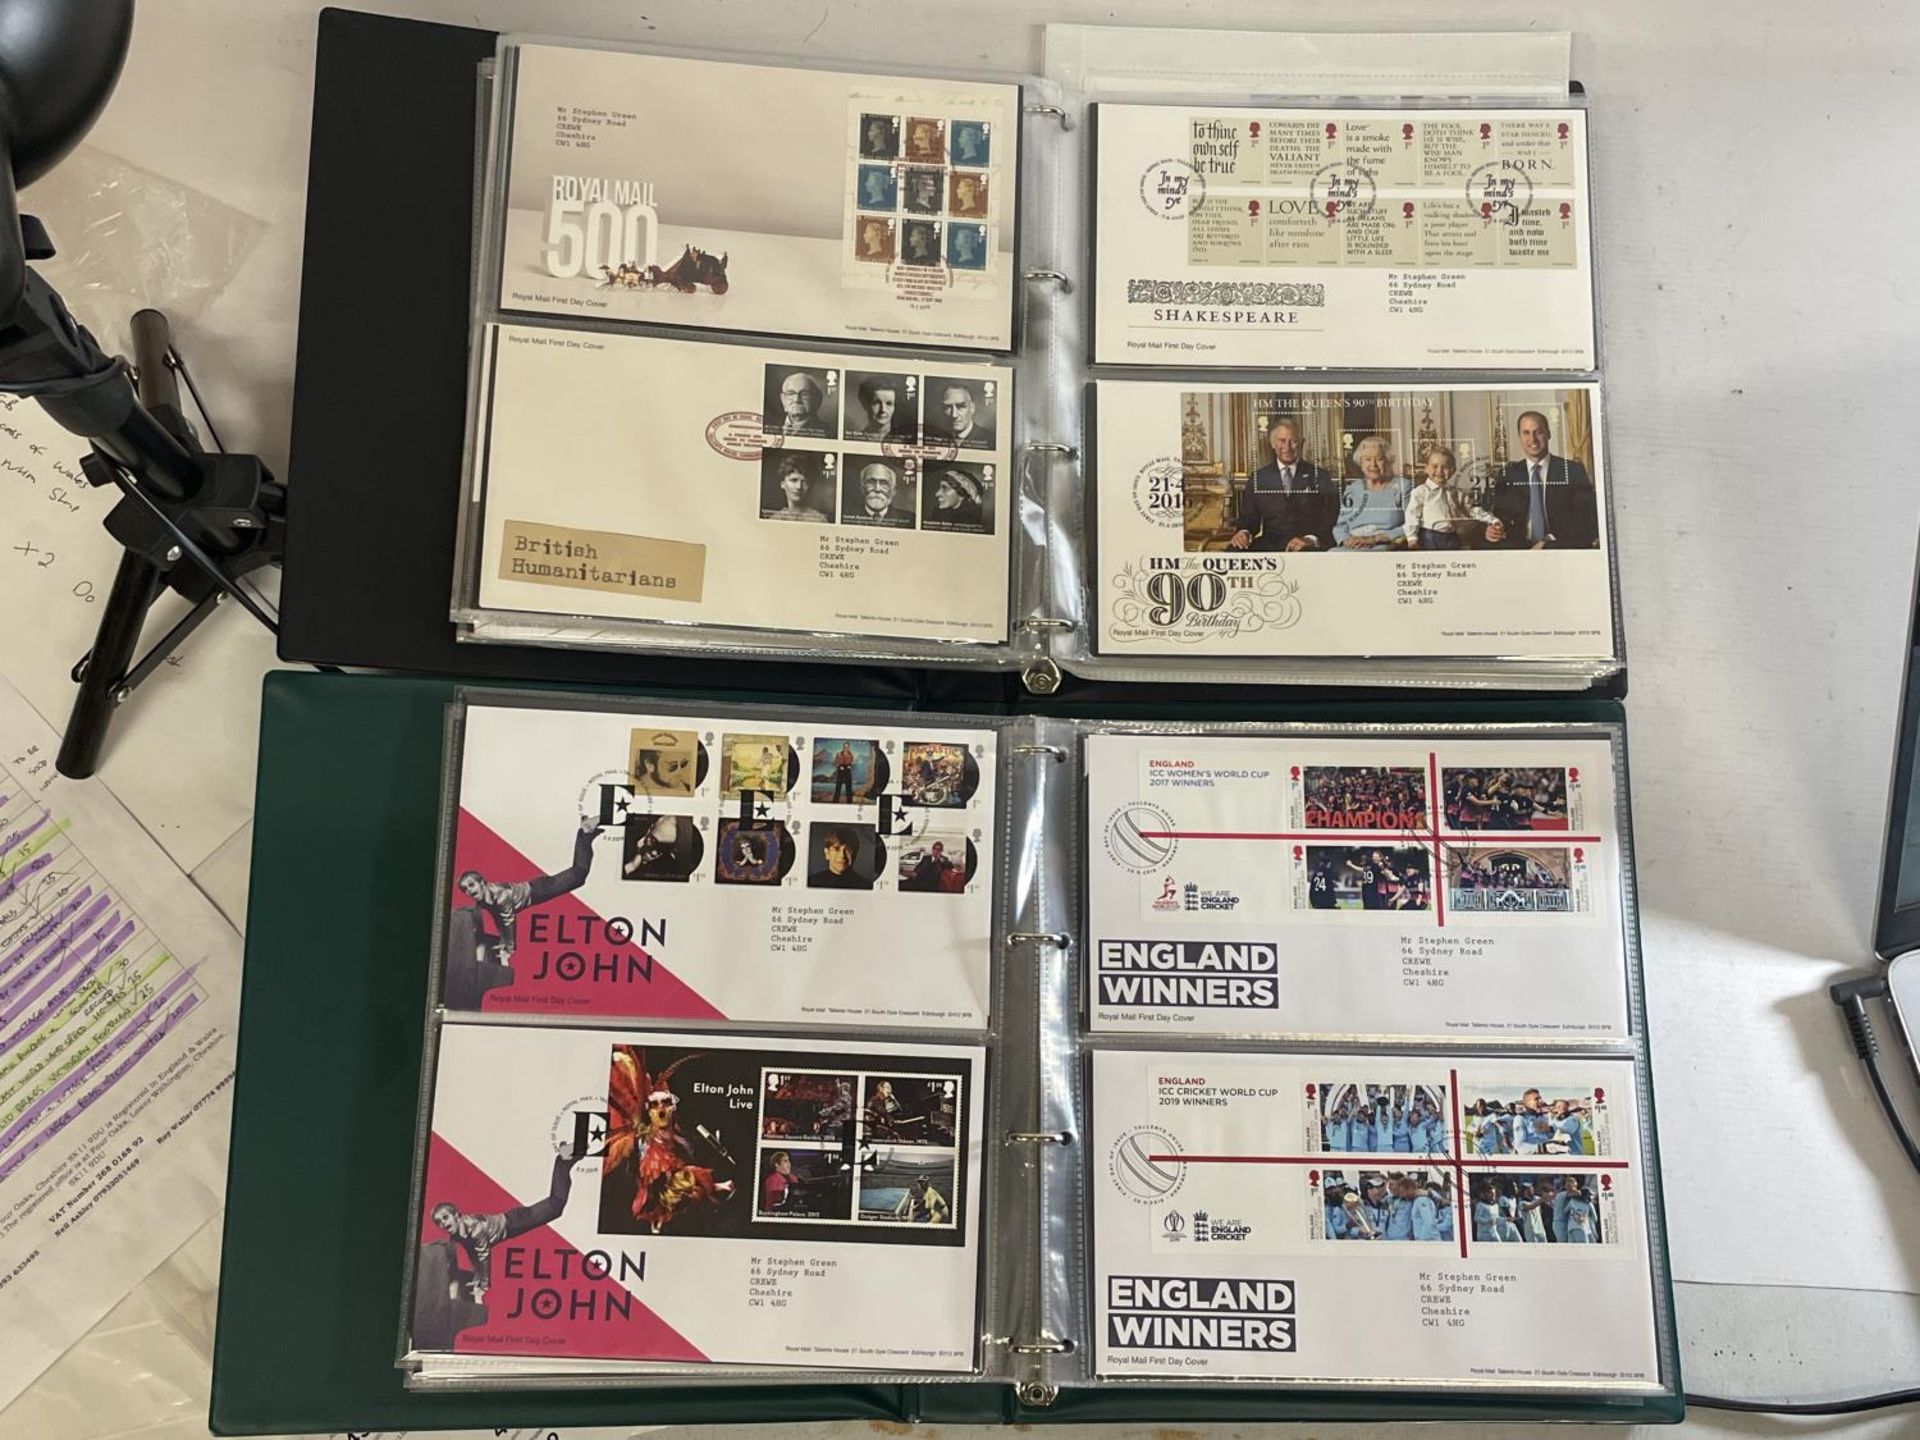 TWO ALBUMS OF ROYAL MAIL FIRST DAY ISSUES TO INCLUDE ROYALTY, HARRY POTTER, JAMES BOND, D-DAY, ETC